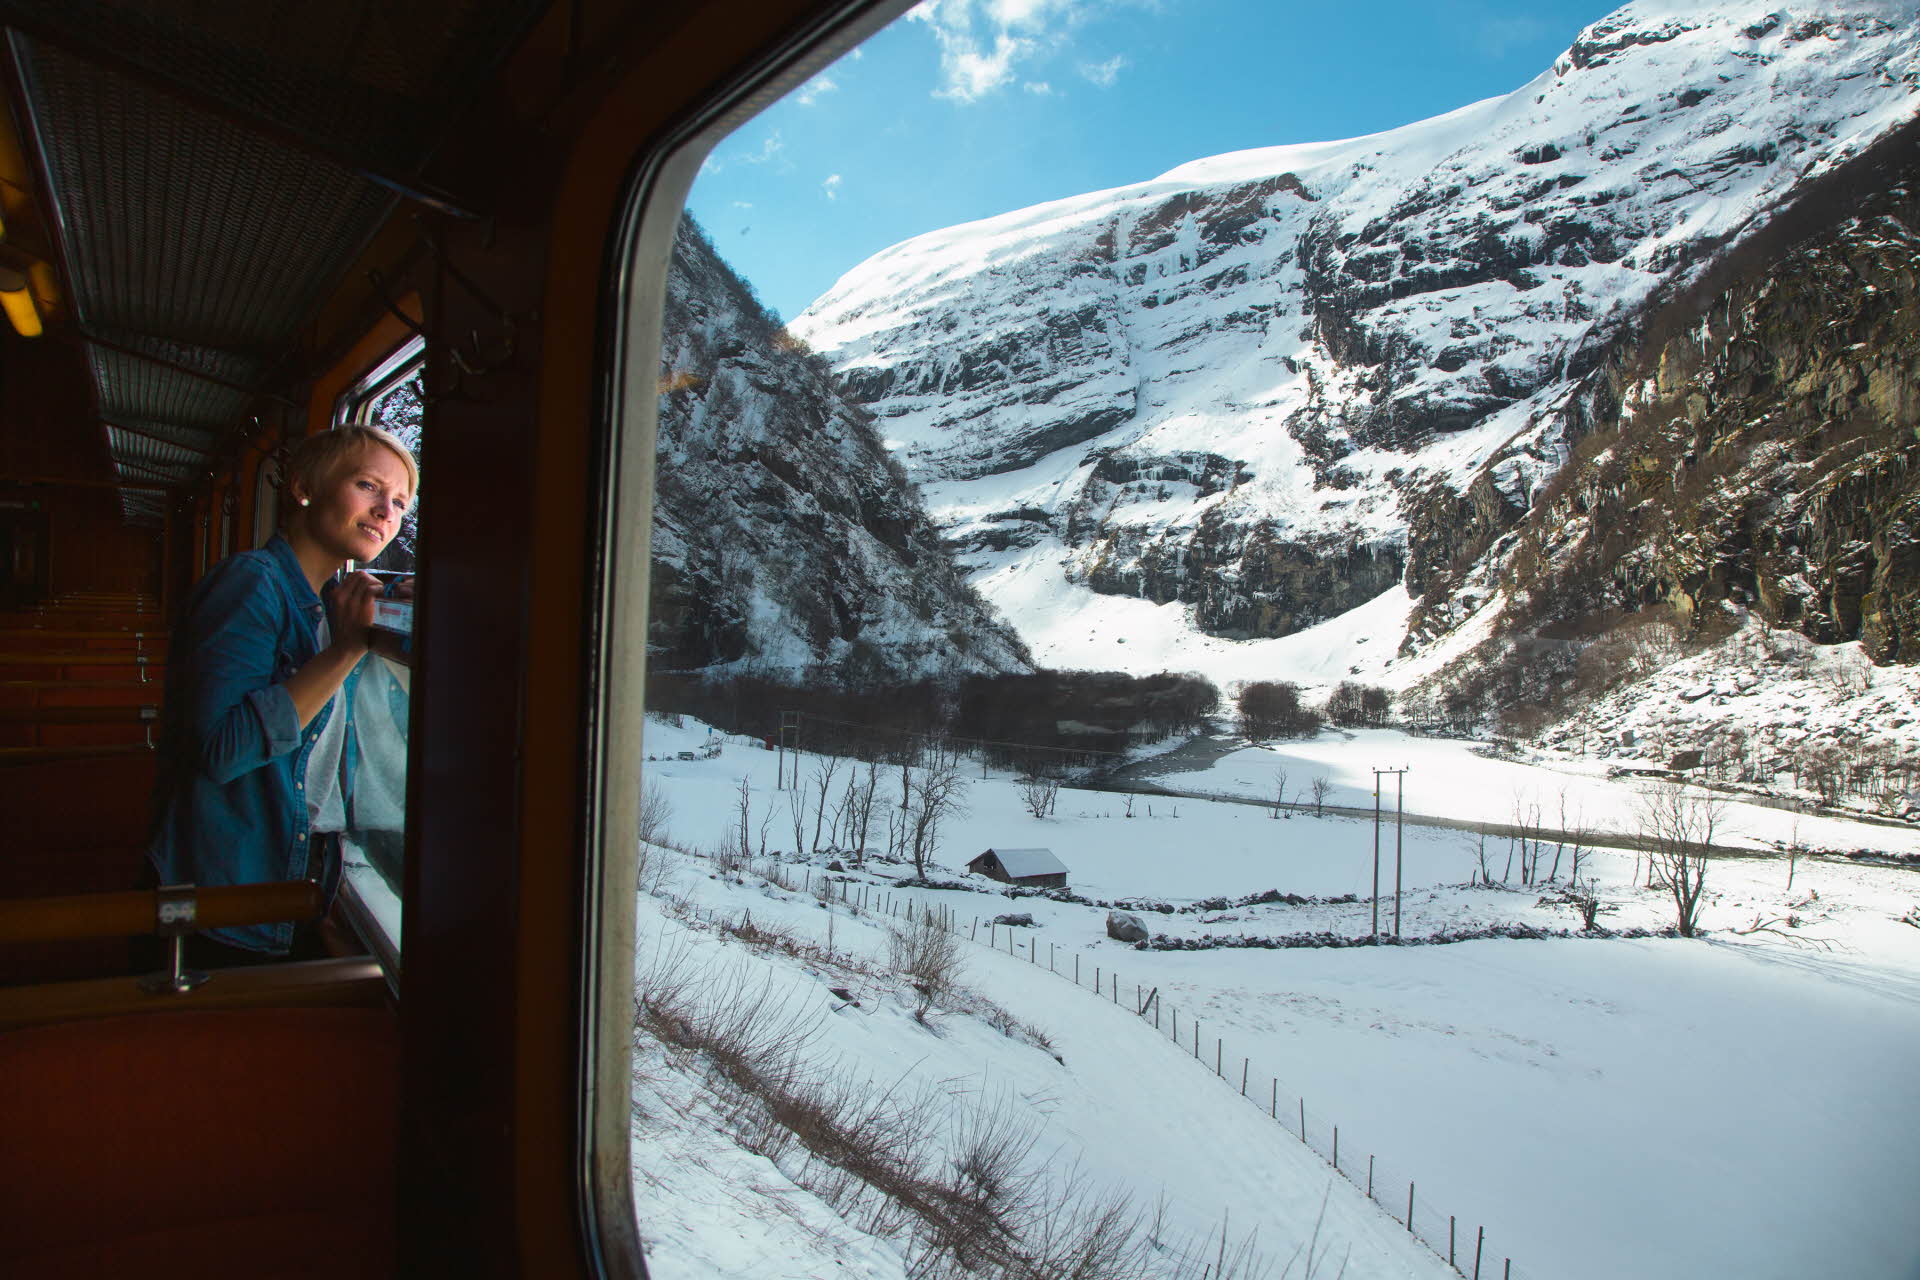 A woman looking out of a window from inside the Flåm Railway. Snowy and mountainous landscape outside. 